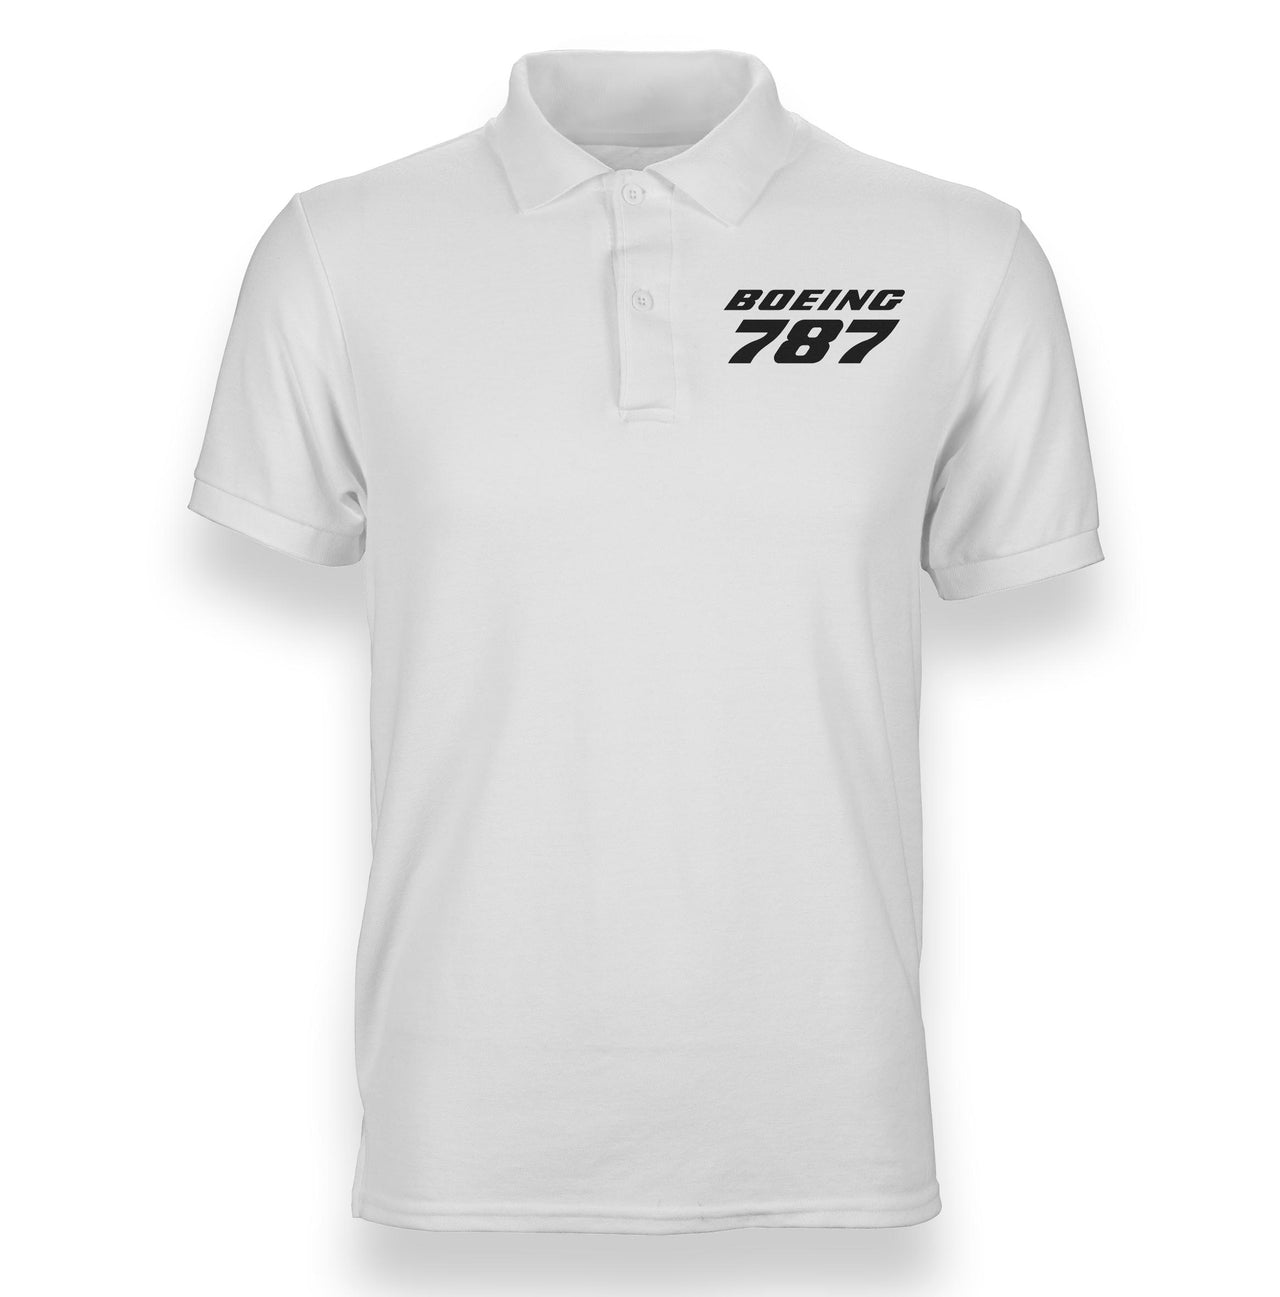 Boeing 787 & Text Designed Polo T-Shirts